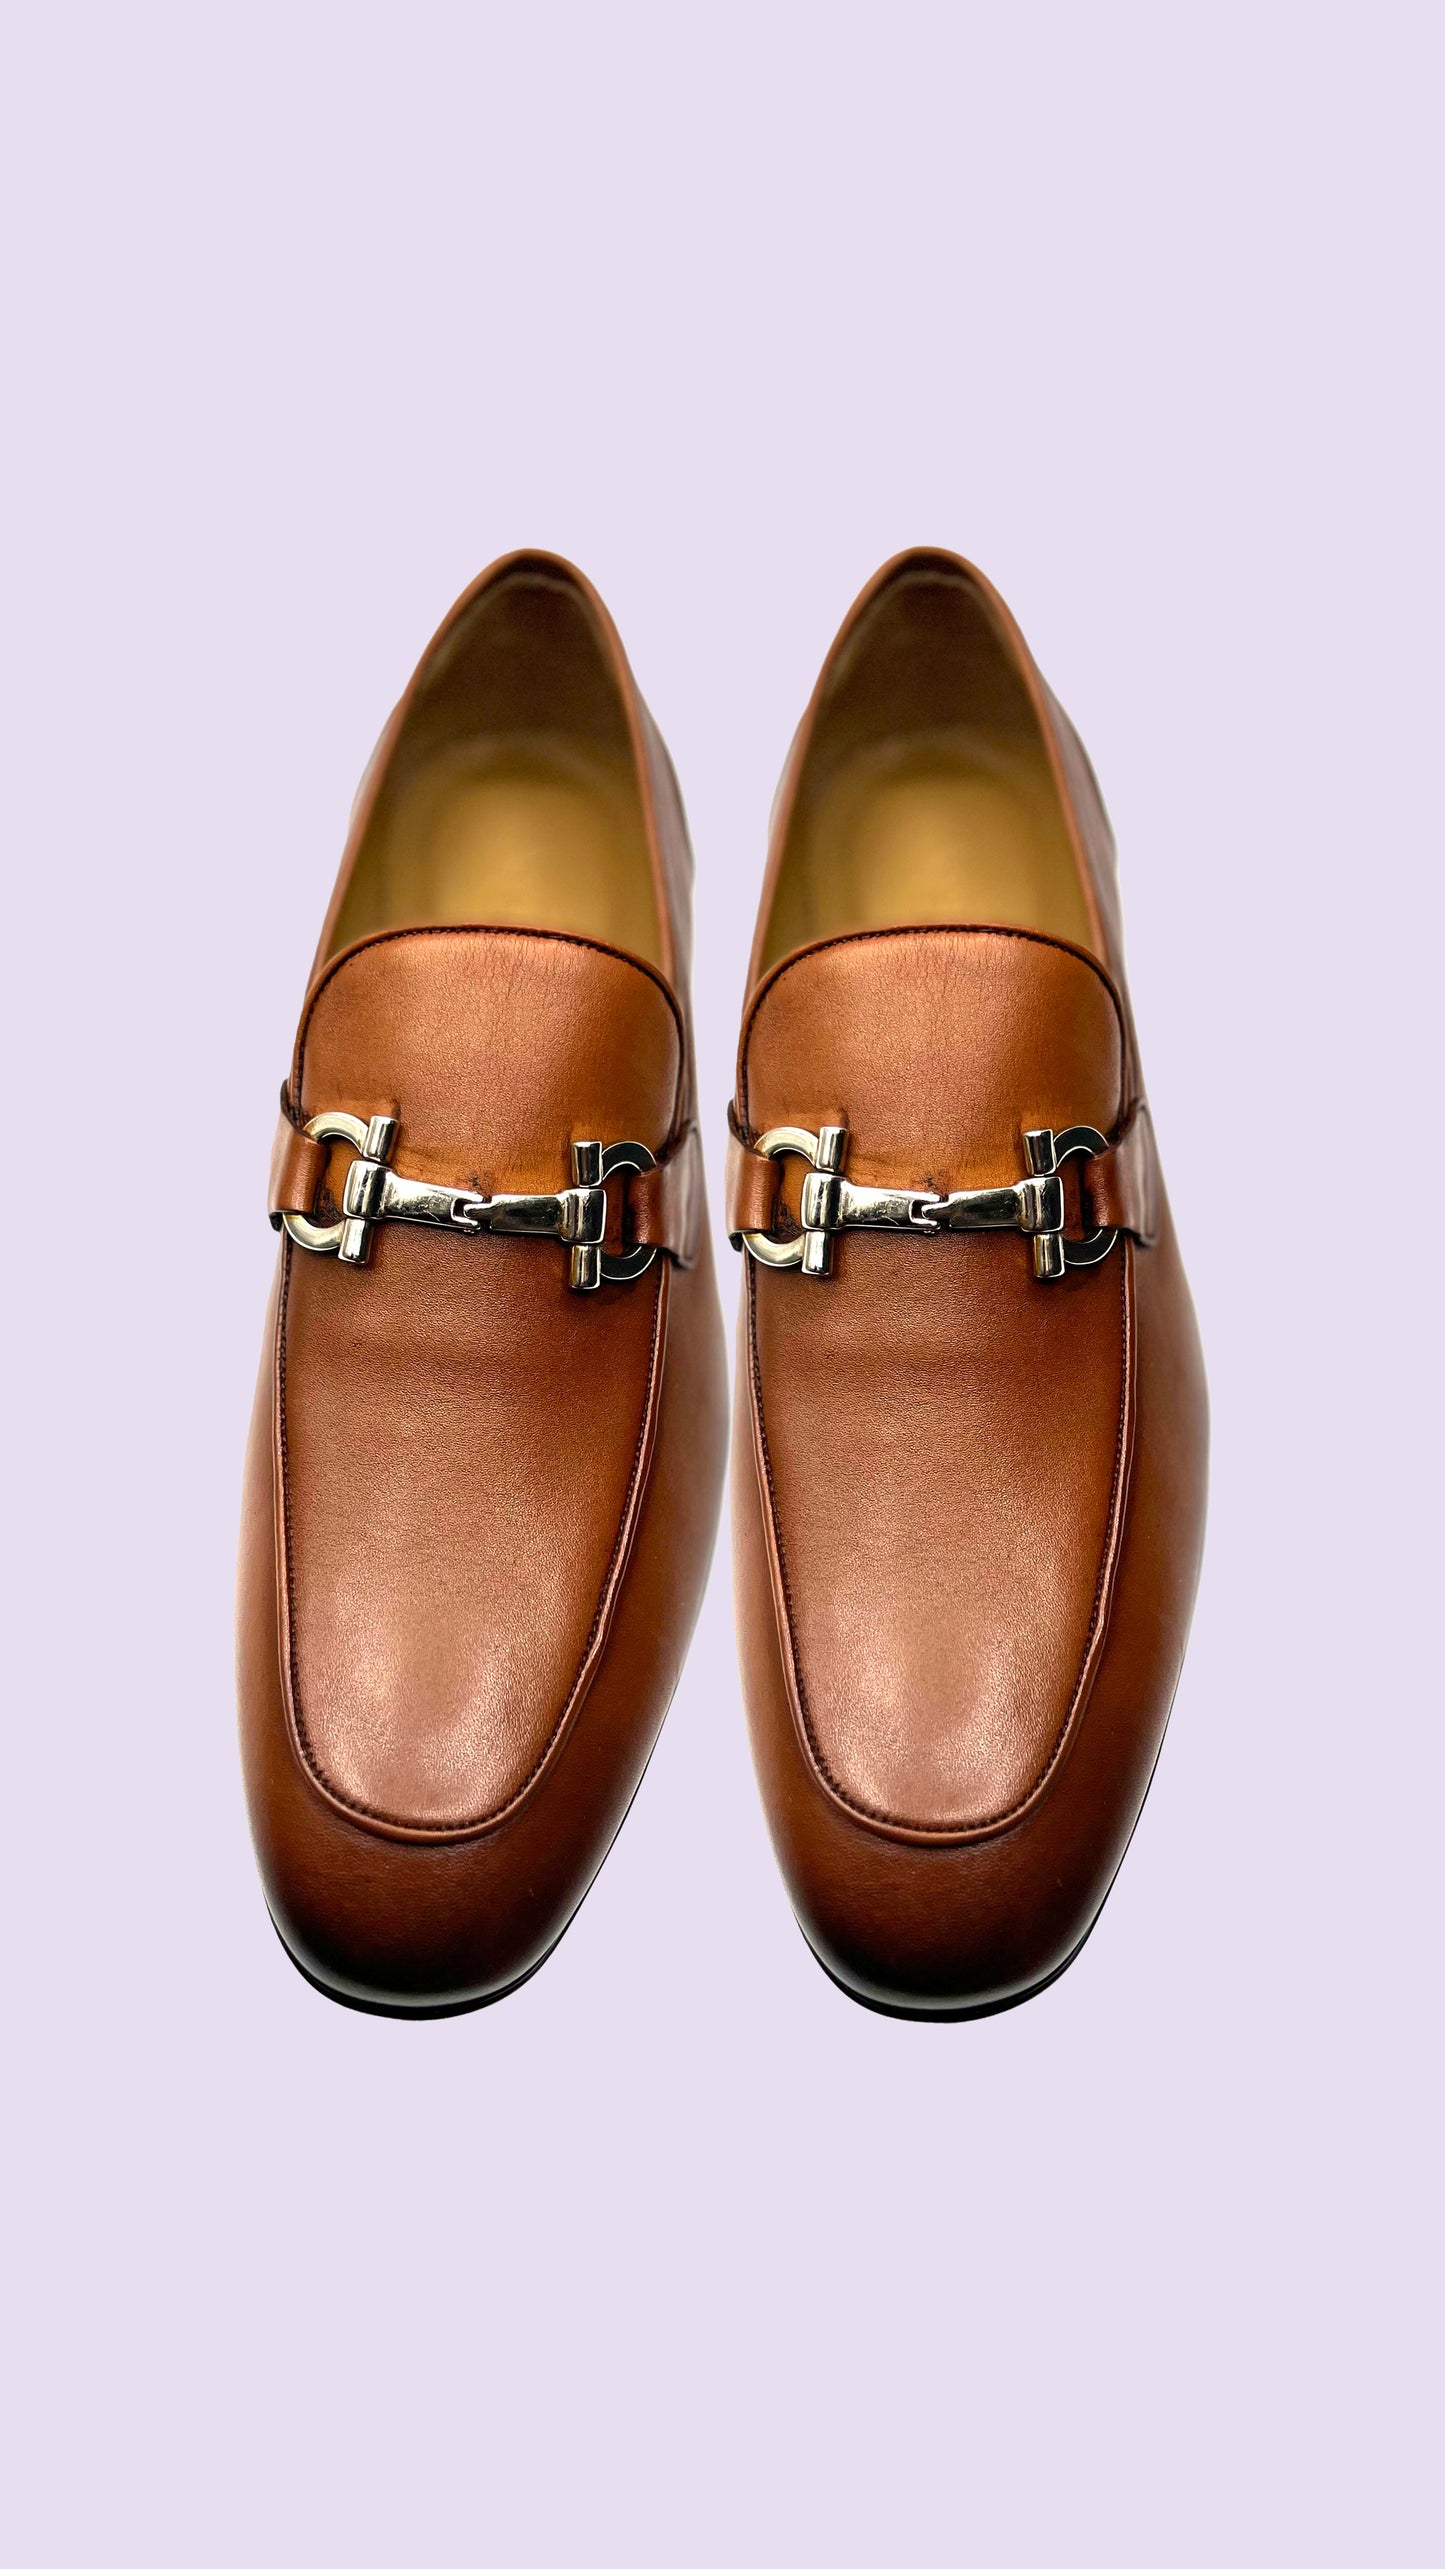 brown shoes SHOES Ph inventory shoes Vercini